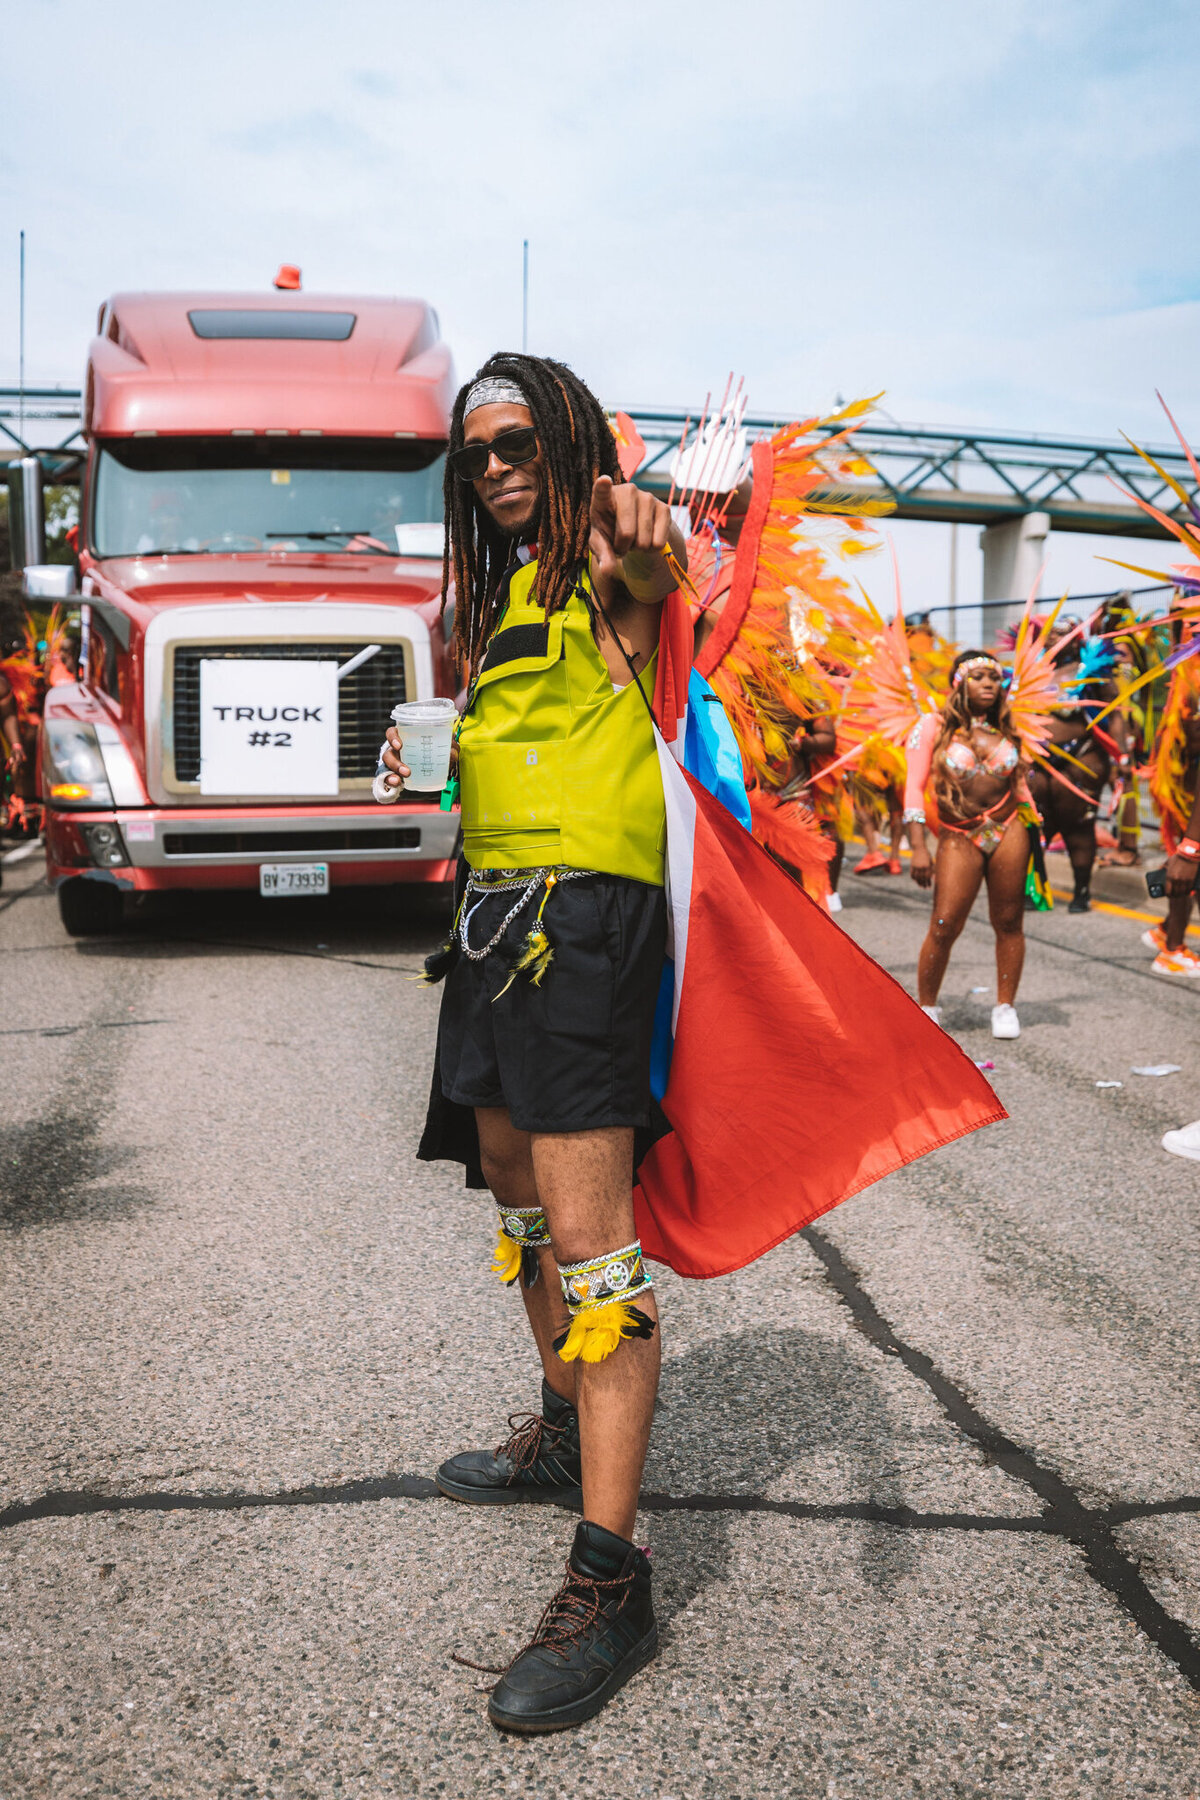 Photos of Masqueraders from Toronto Carnival 2023 - Sunlime Mas Band - Medium Band of The Year 2023-114